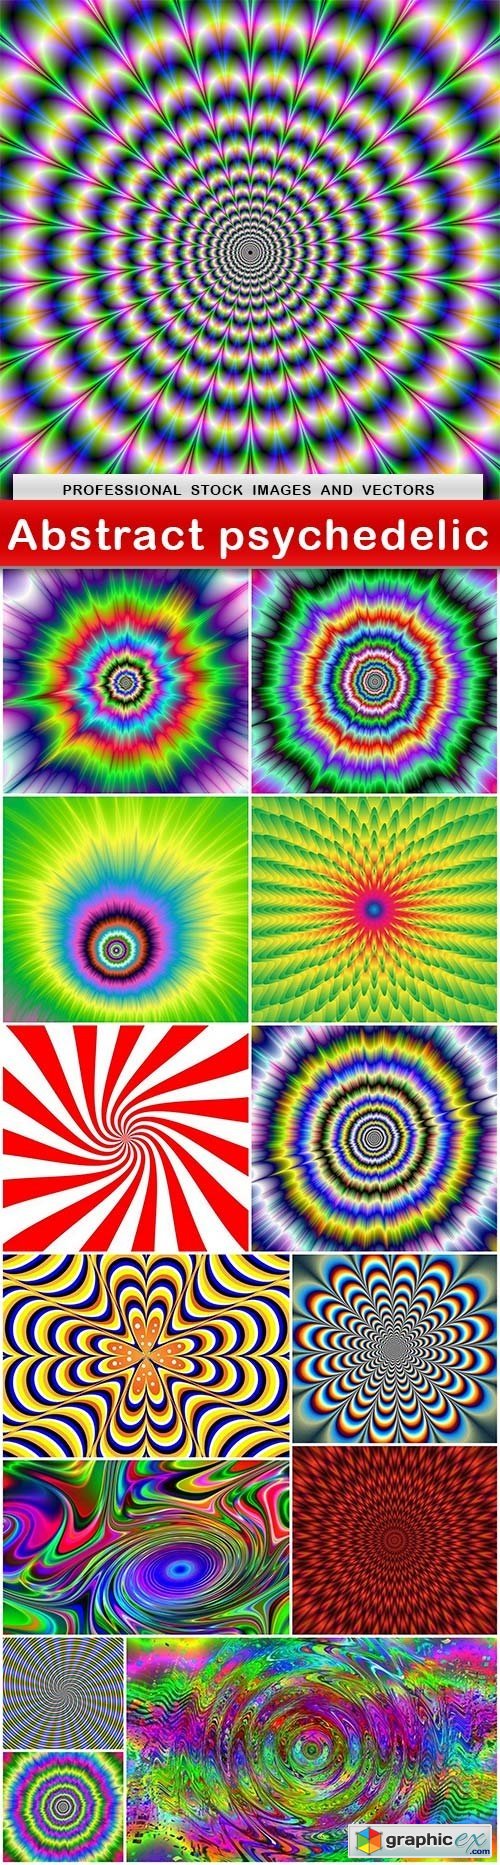 Abstract psychedelic - 14 UHQ JPEG